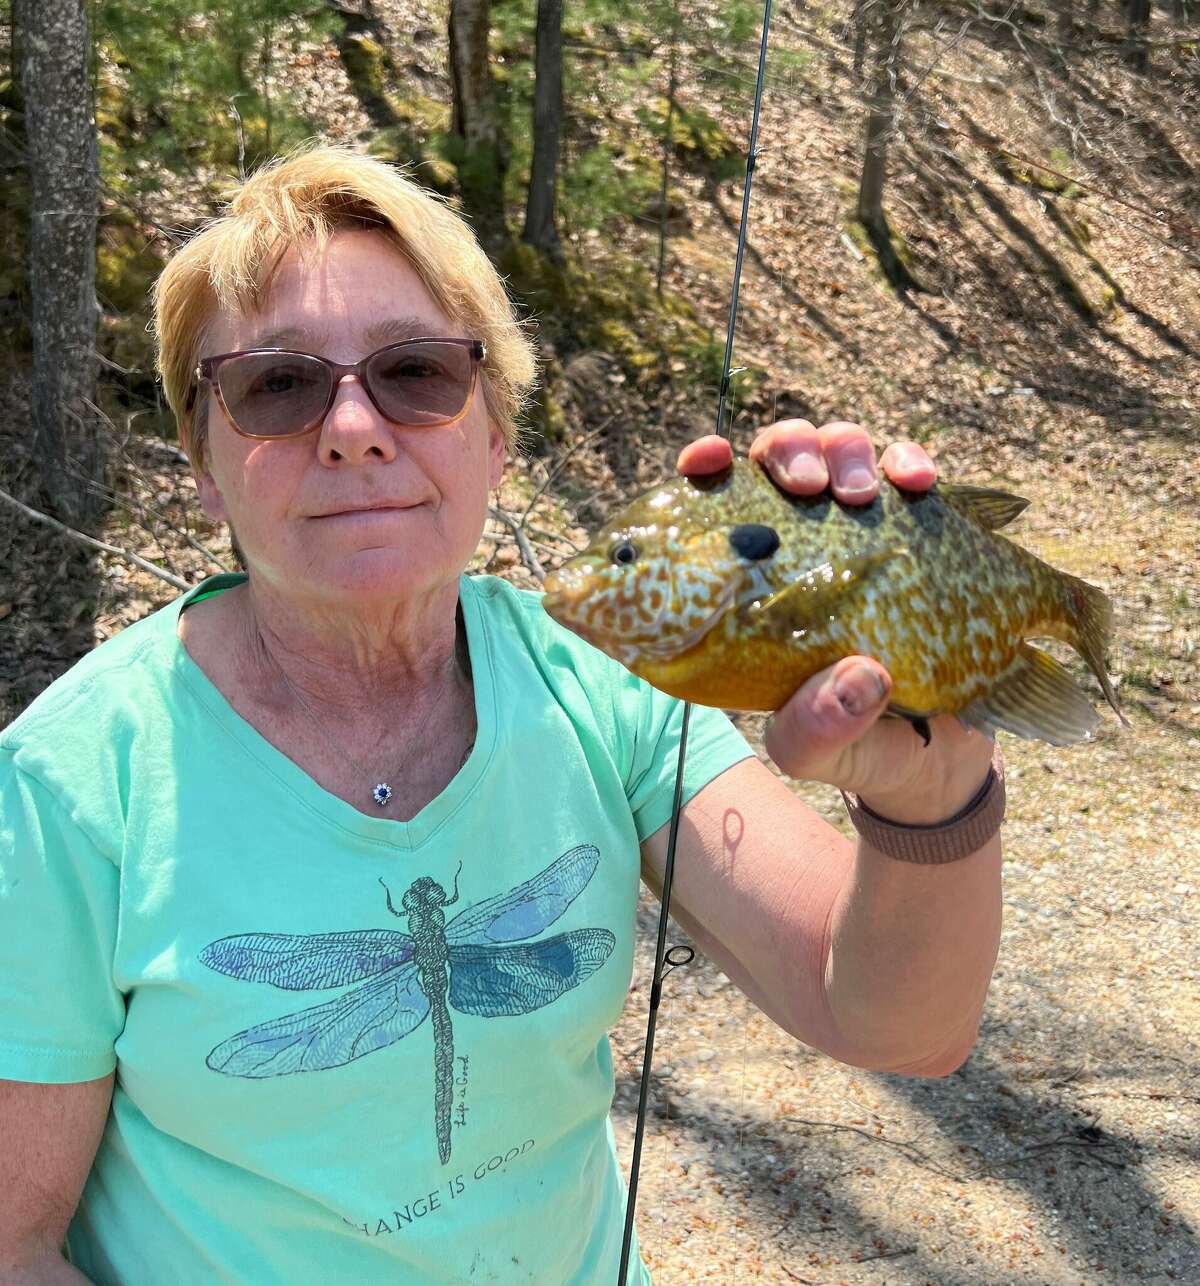 Kathy Songer, of Gladwin, shows a slab-sized bluegill that she caught from a private lake in Roscommon County. June is a prime month for bluegills and their kin, wherever they swim in Michigan.